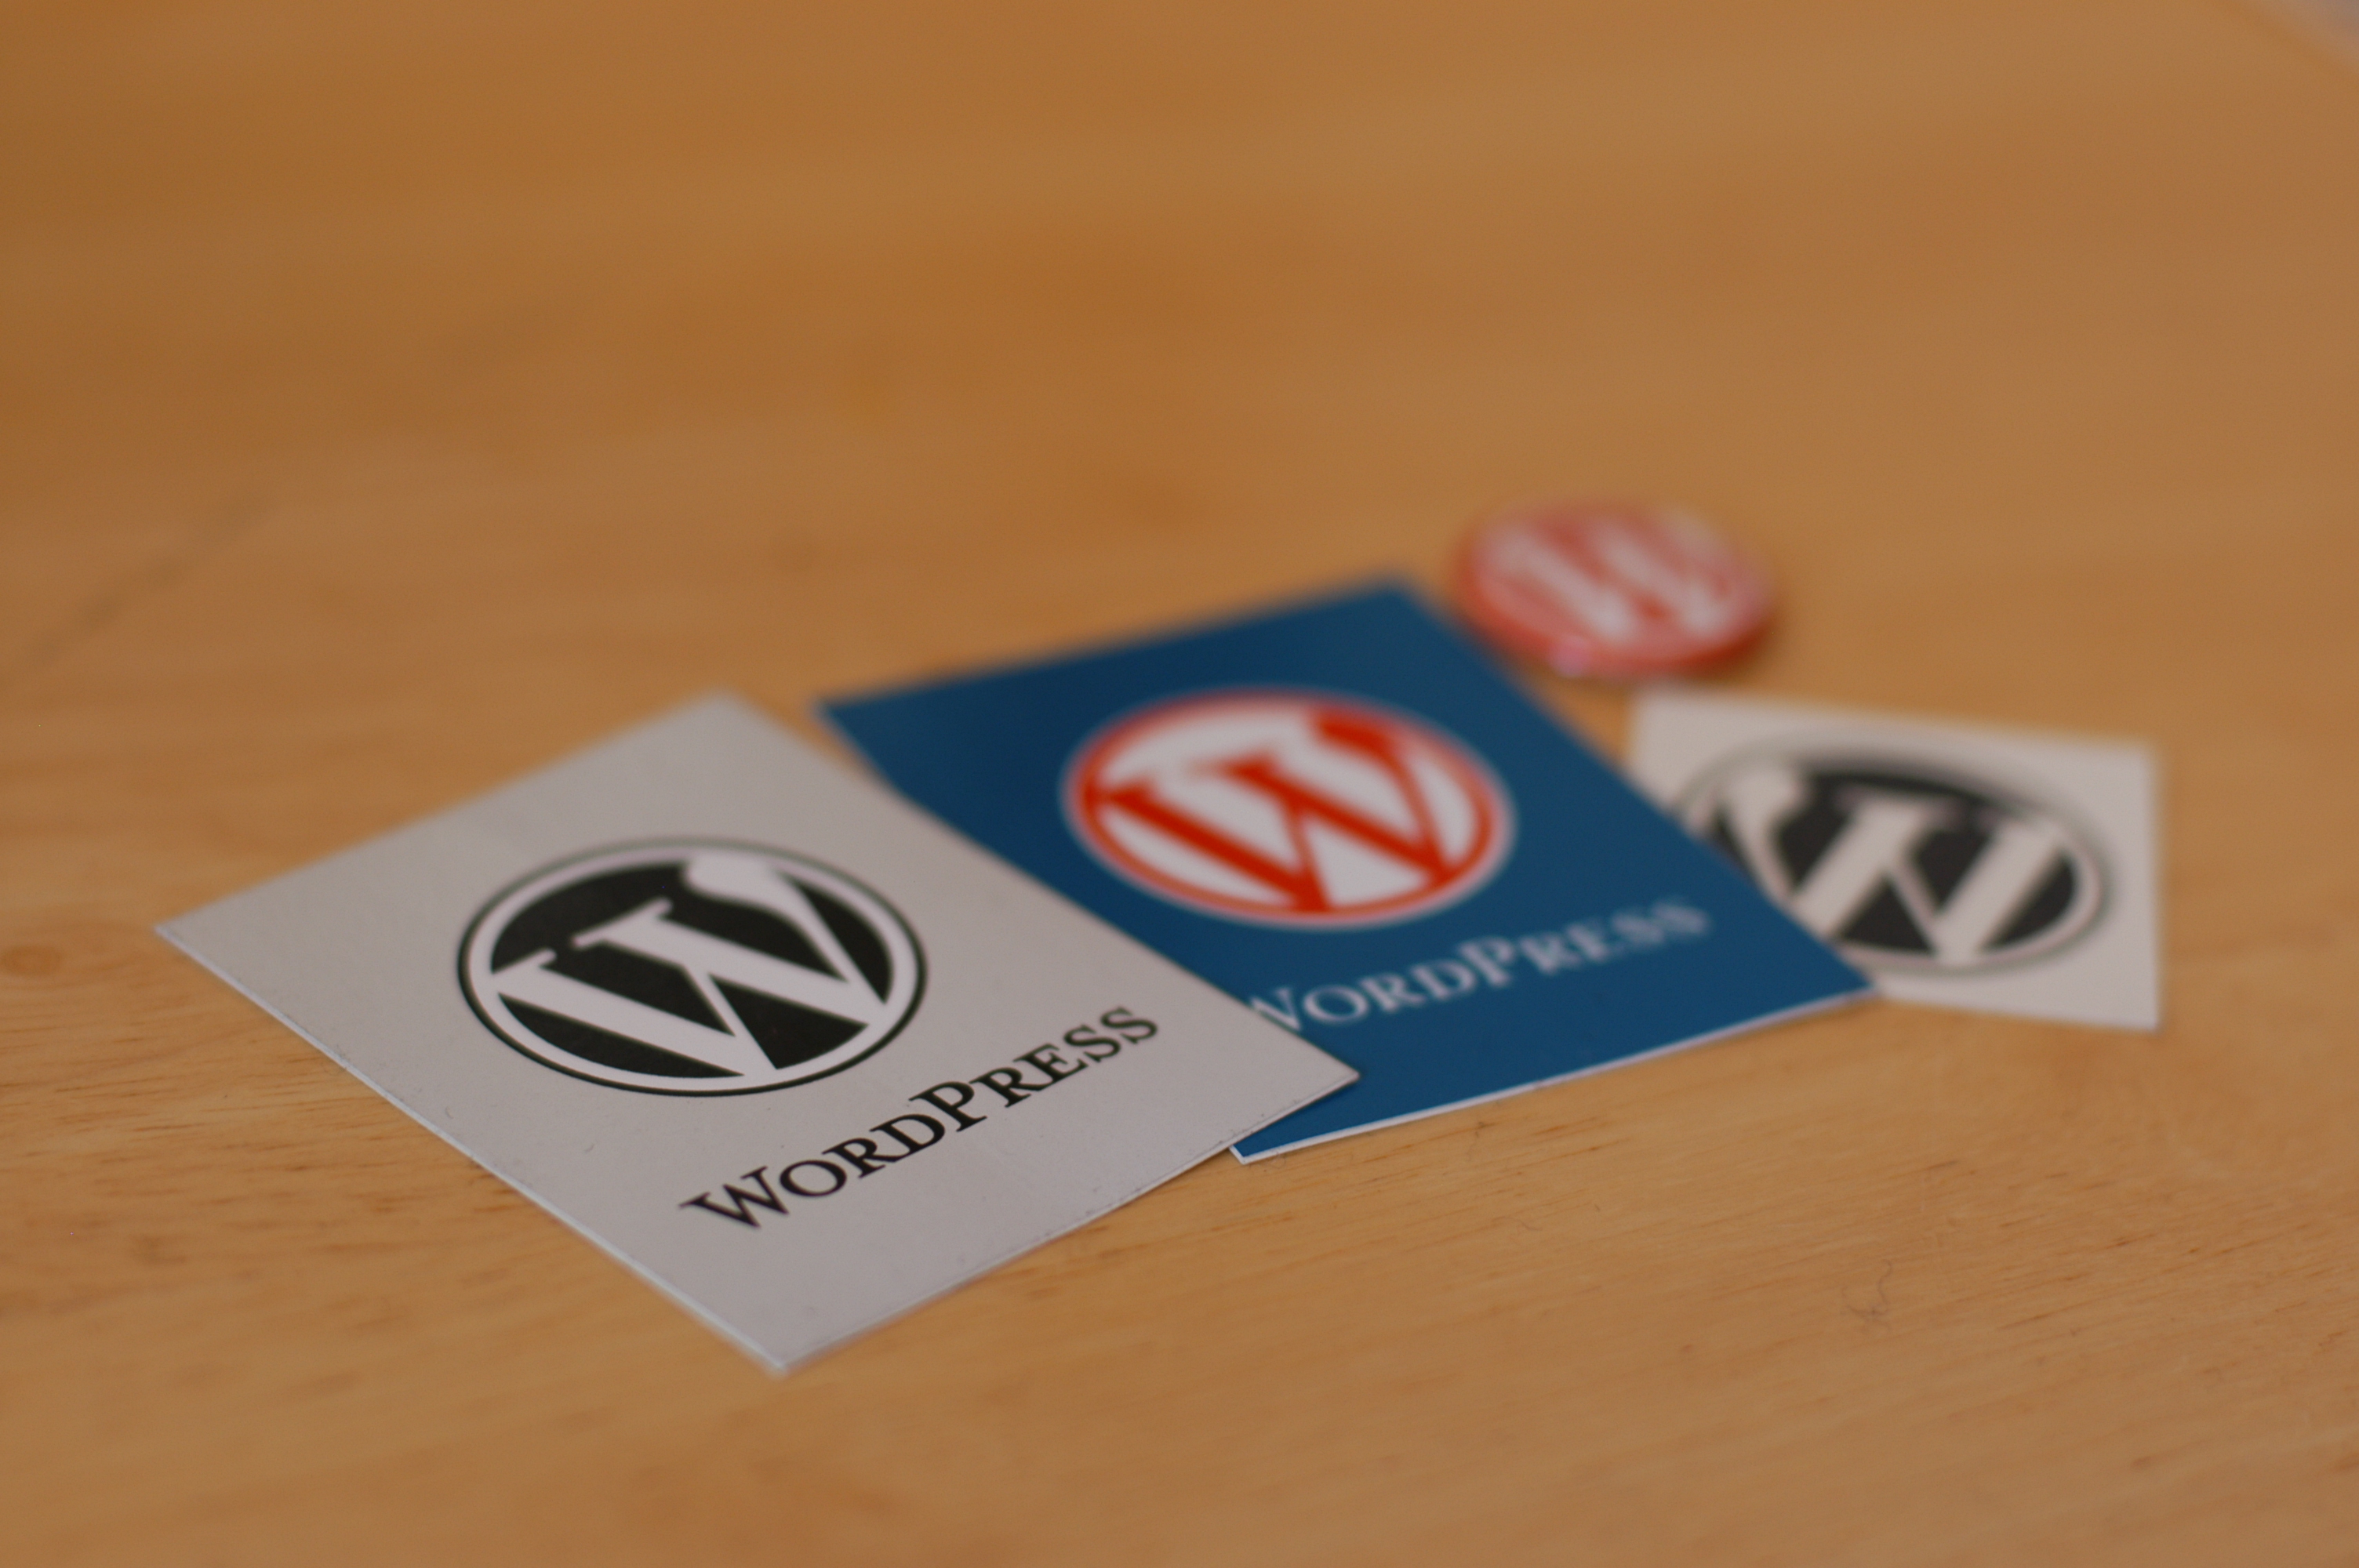 WordPress to ditch React library over Facebook patent clause risk